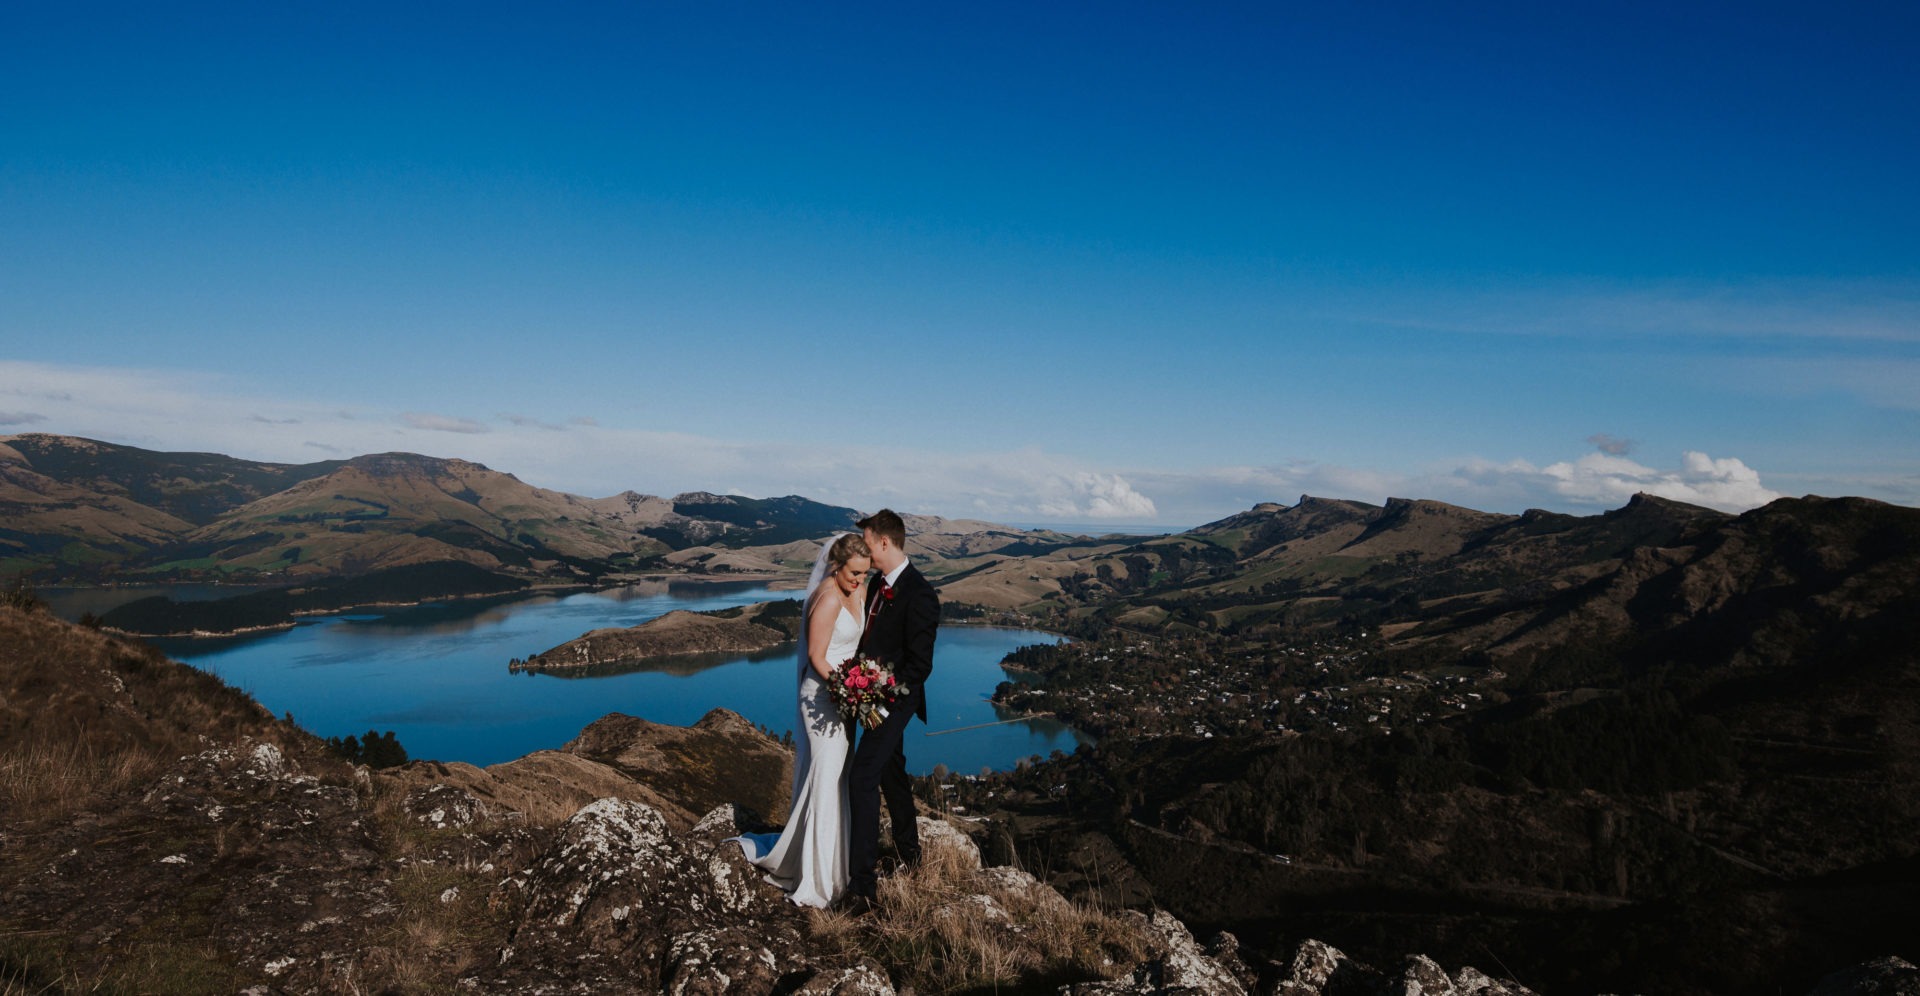 Bride and Groom on top of mountains with lake in background - Wedding Photography by Tracey Allsopp